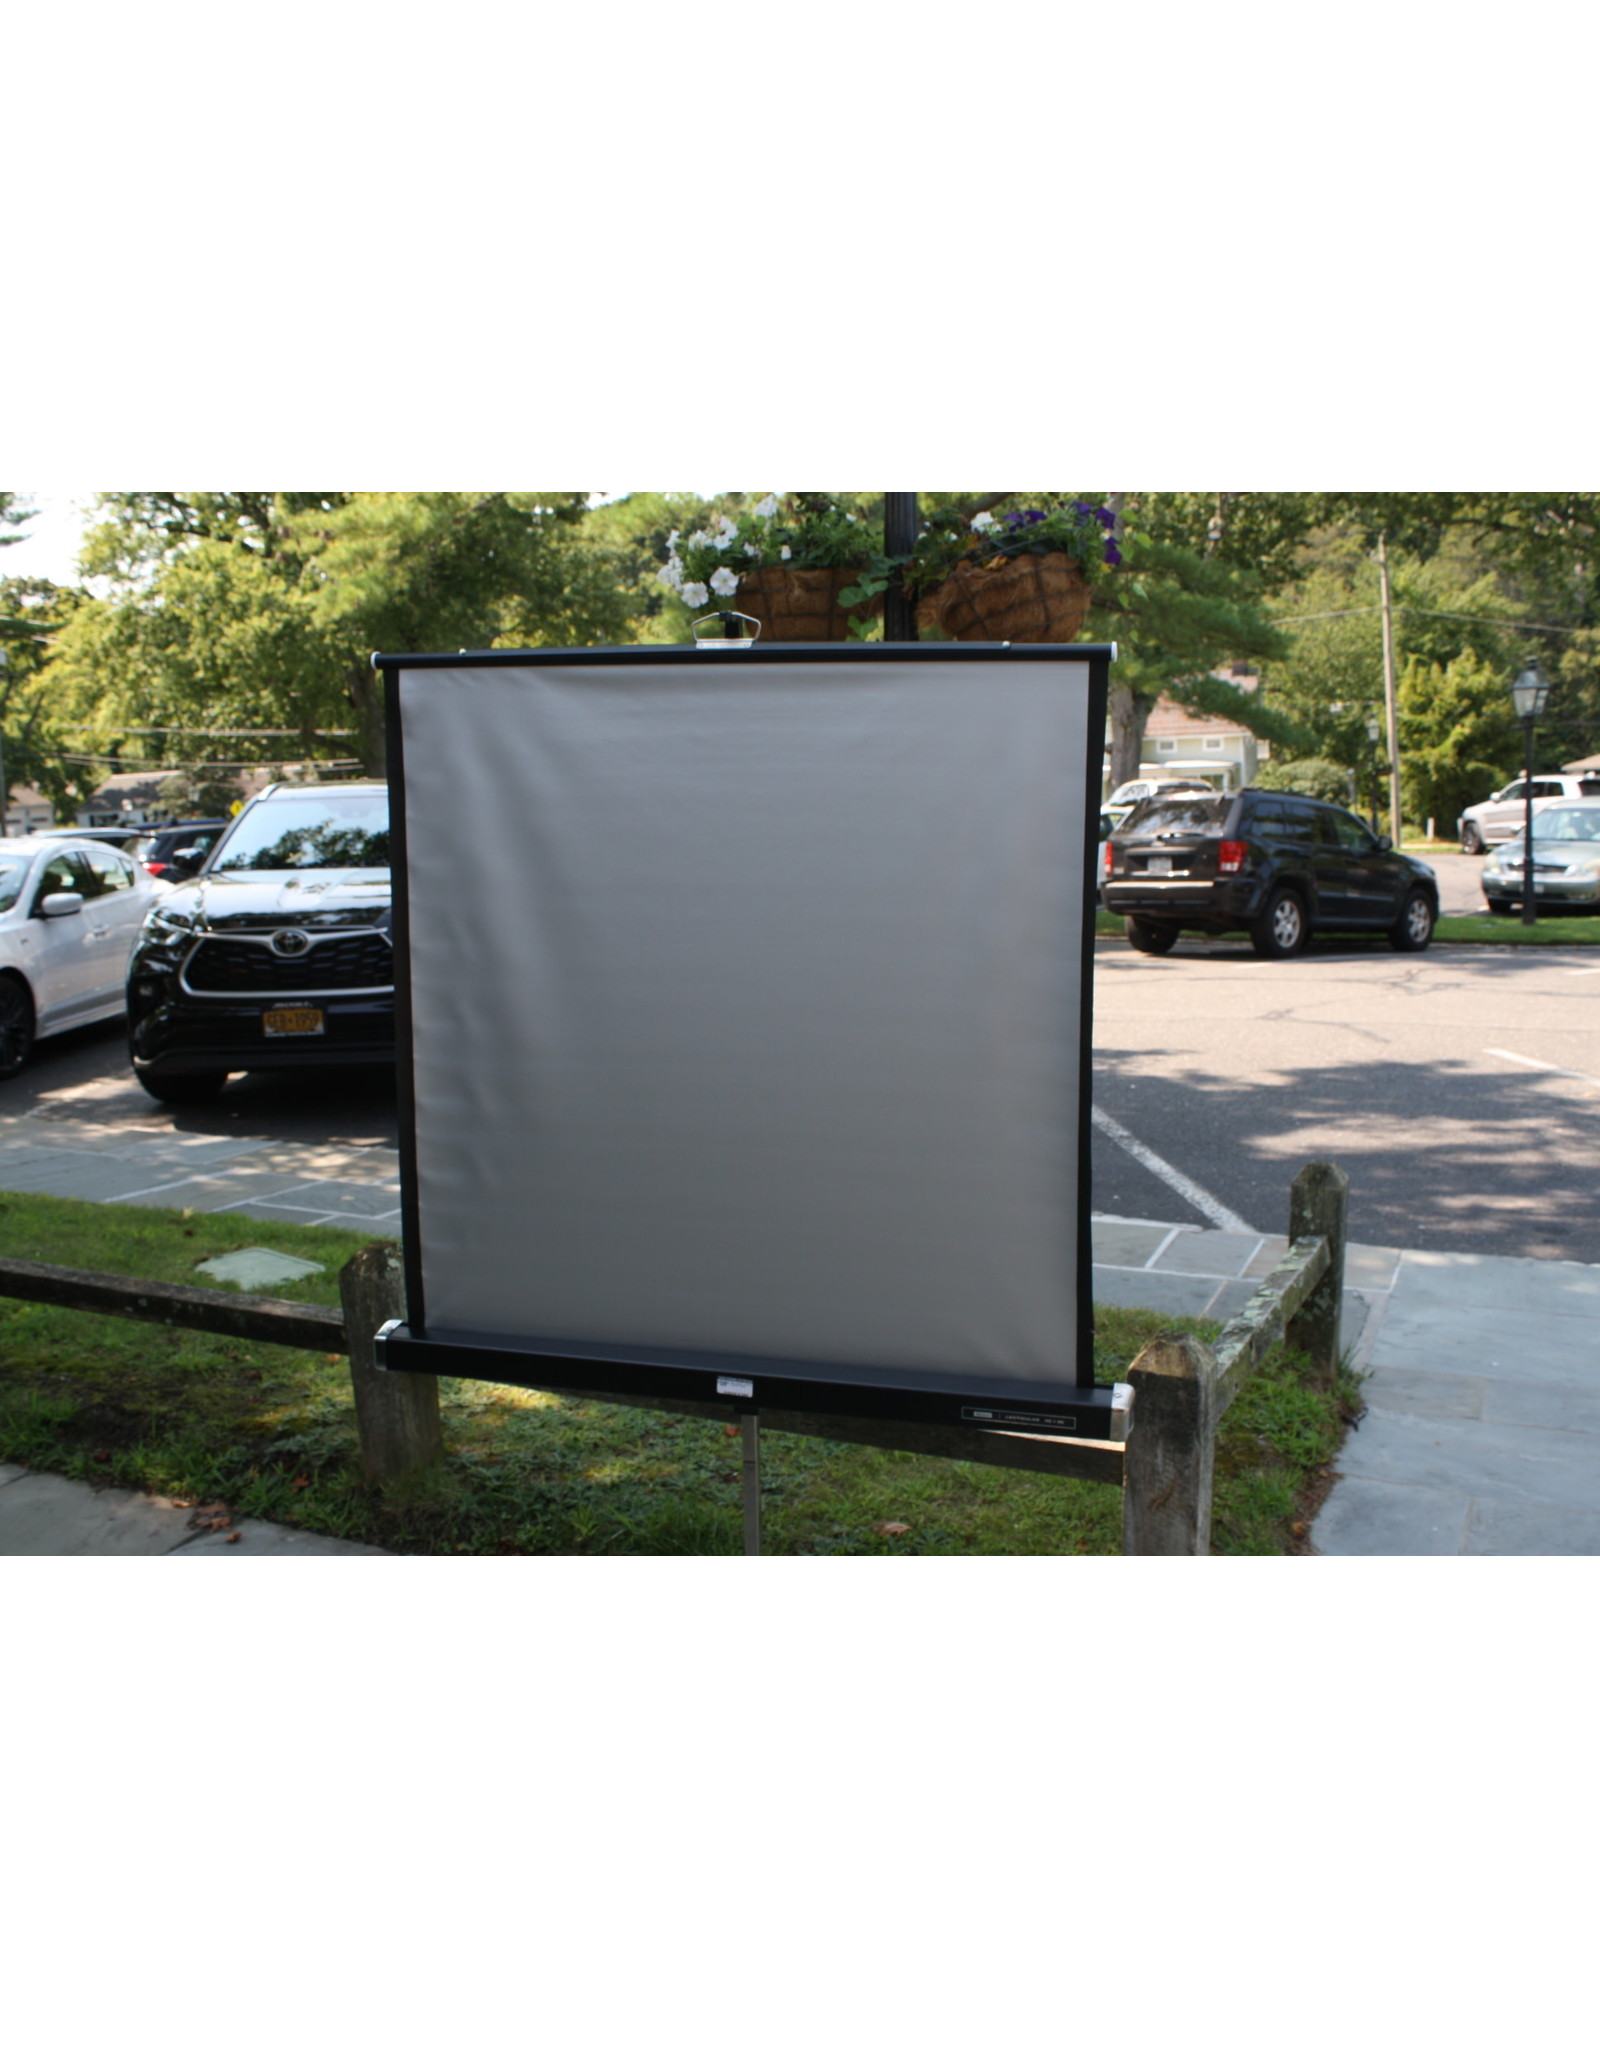 CCTS Sears 40x40in Lenticular Projection Screen